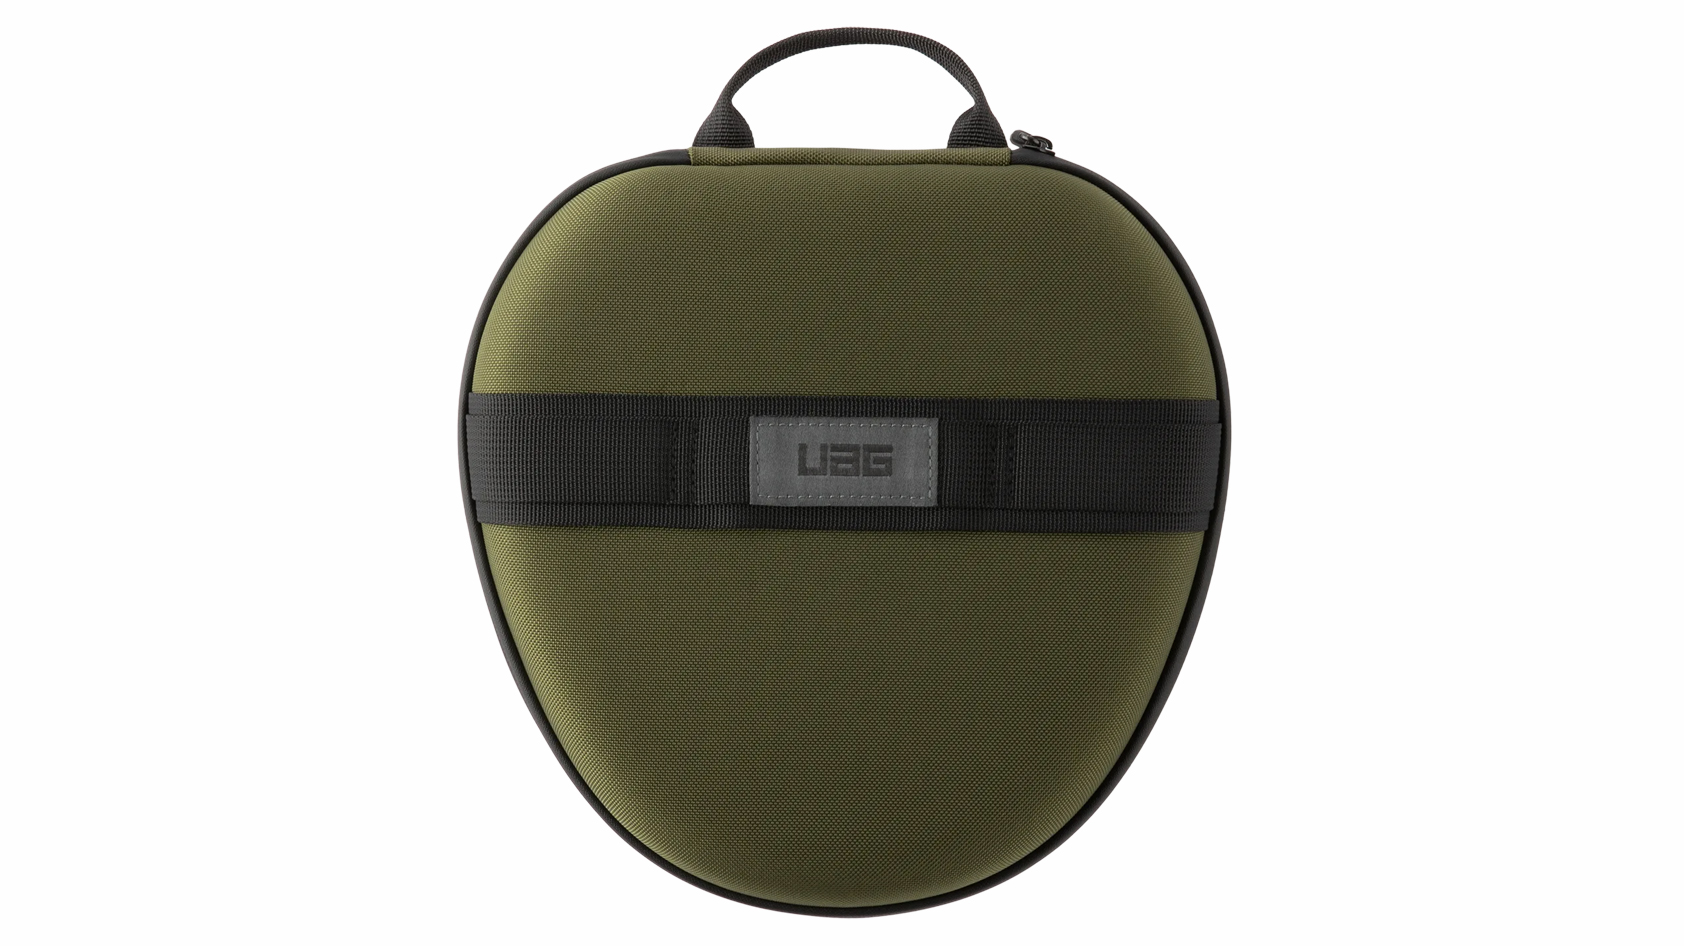 The Urban Armor Gear headphones case in Olive for the Apple AirPods Max shown when closed.